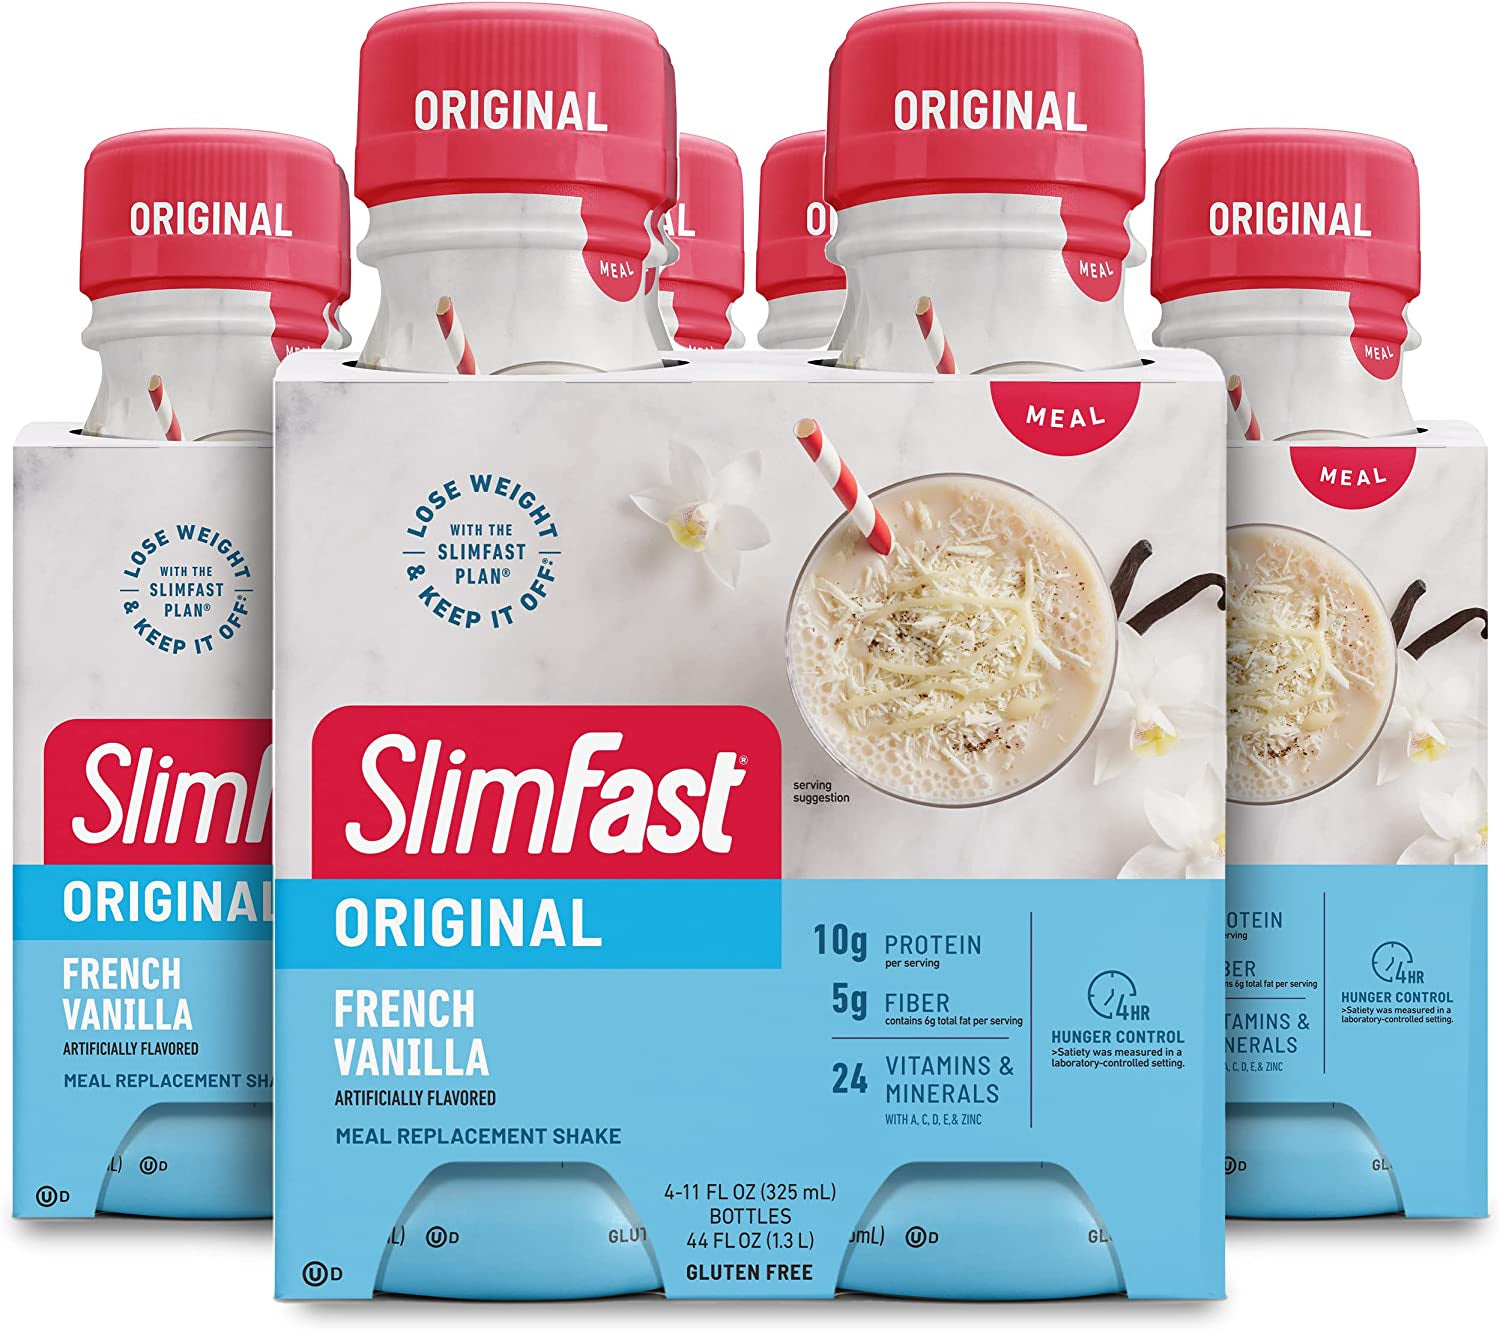 Slimfast Meal Replacement Shake, Original French Vanilla, 10G of Ready to Drink Protein, 11 Fl. Oz Bottle, 4 Count (Pack of 3) (Packaging May Vary)